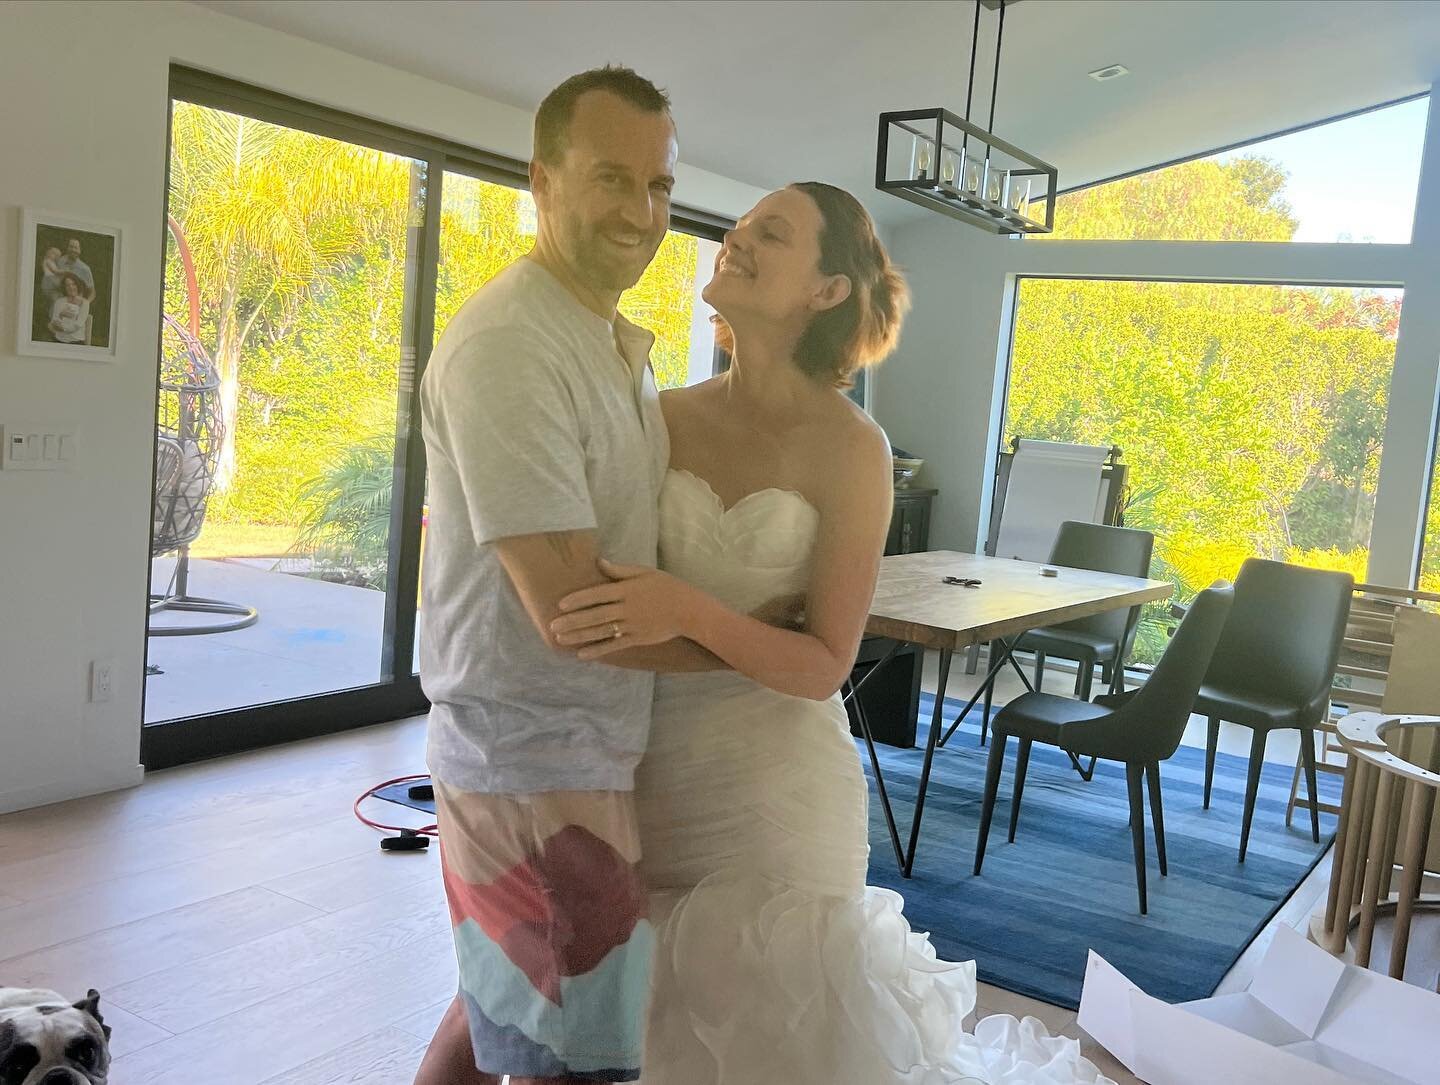 Decided to pull my wedding dress out of its fancy box to see if it still fits as we celebrate 11 years of marriage. It fits, and it&rsquo;s really heavy! 

+++++

14 years ago @wyatt_earp and I moved in together. I was 22 years old, we both worked in